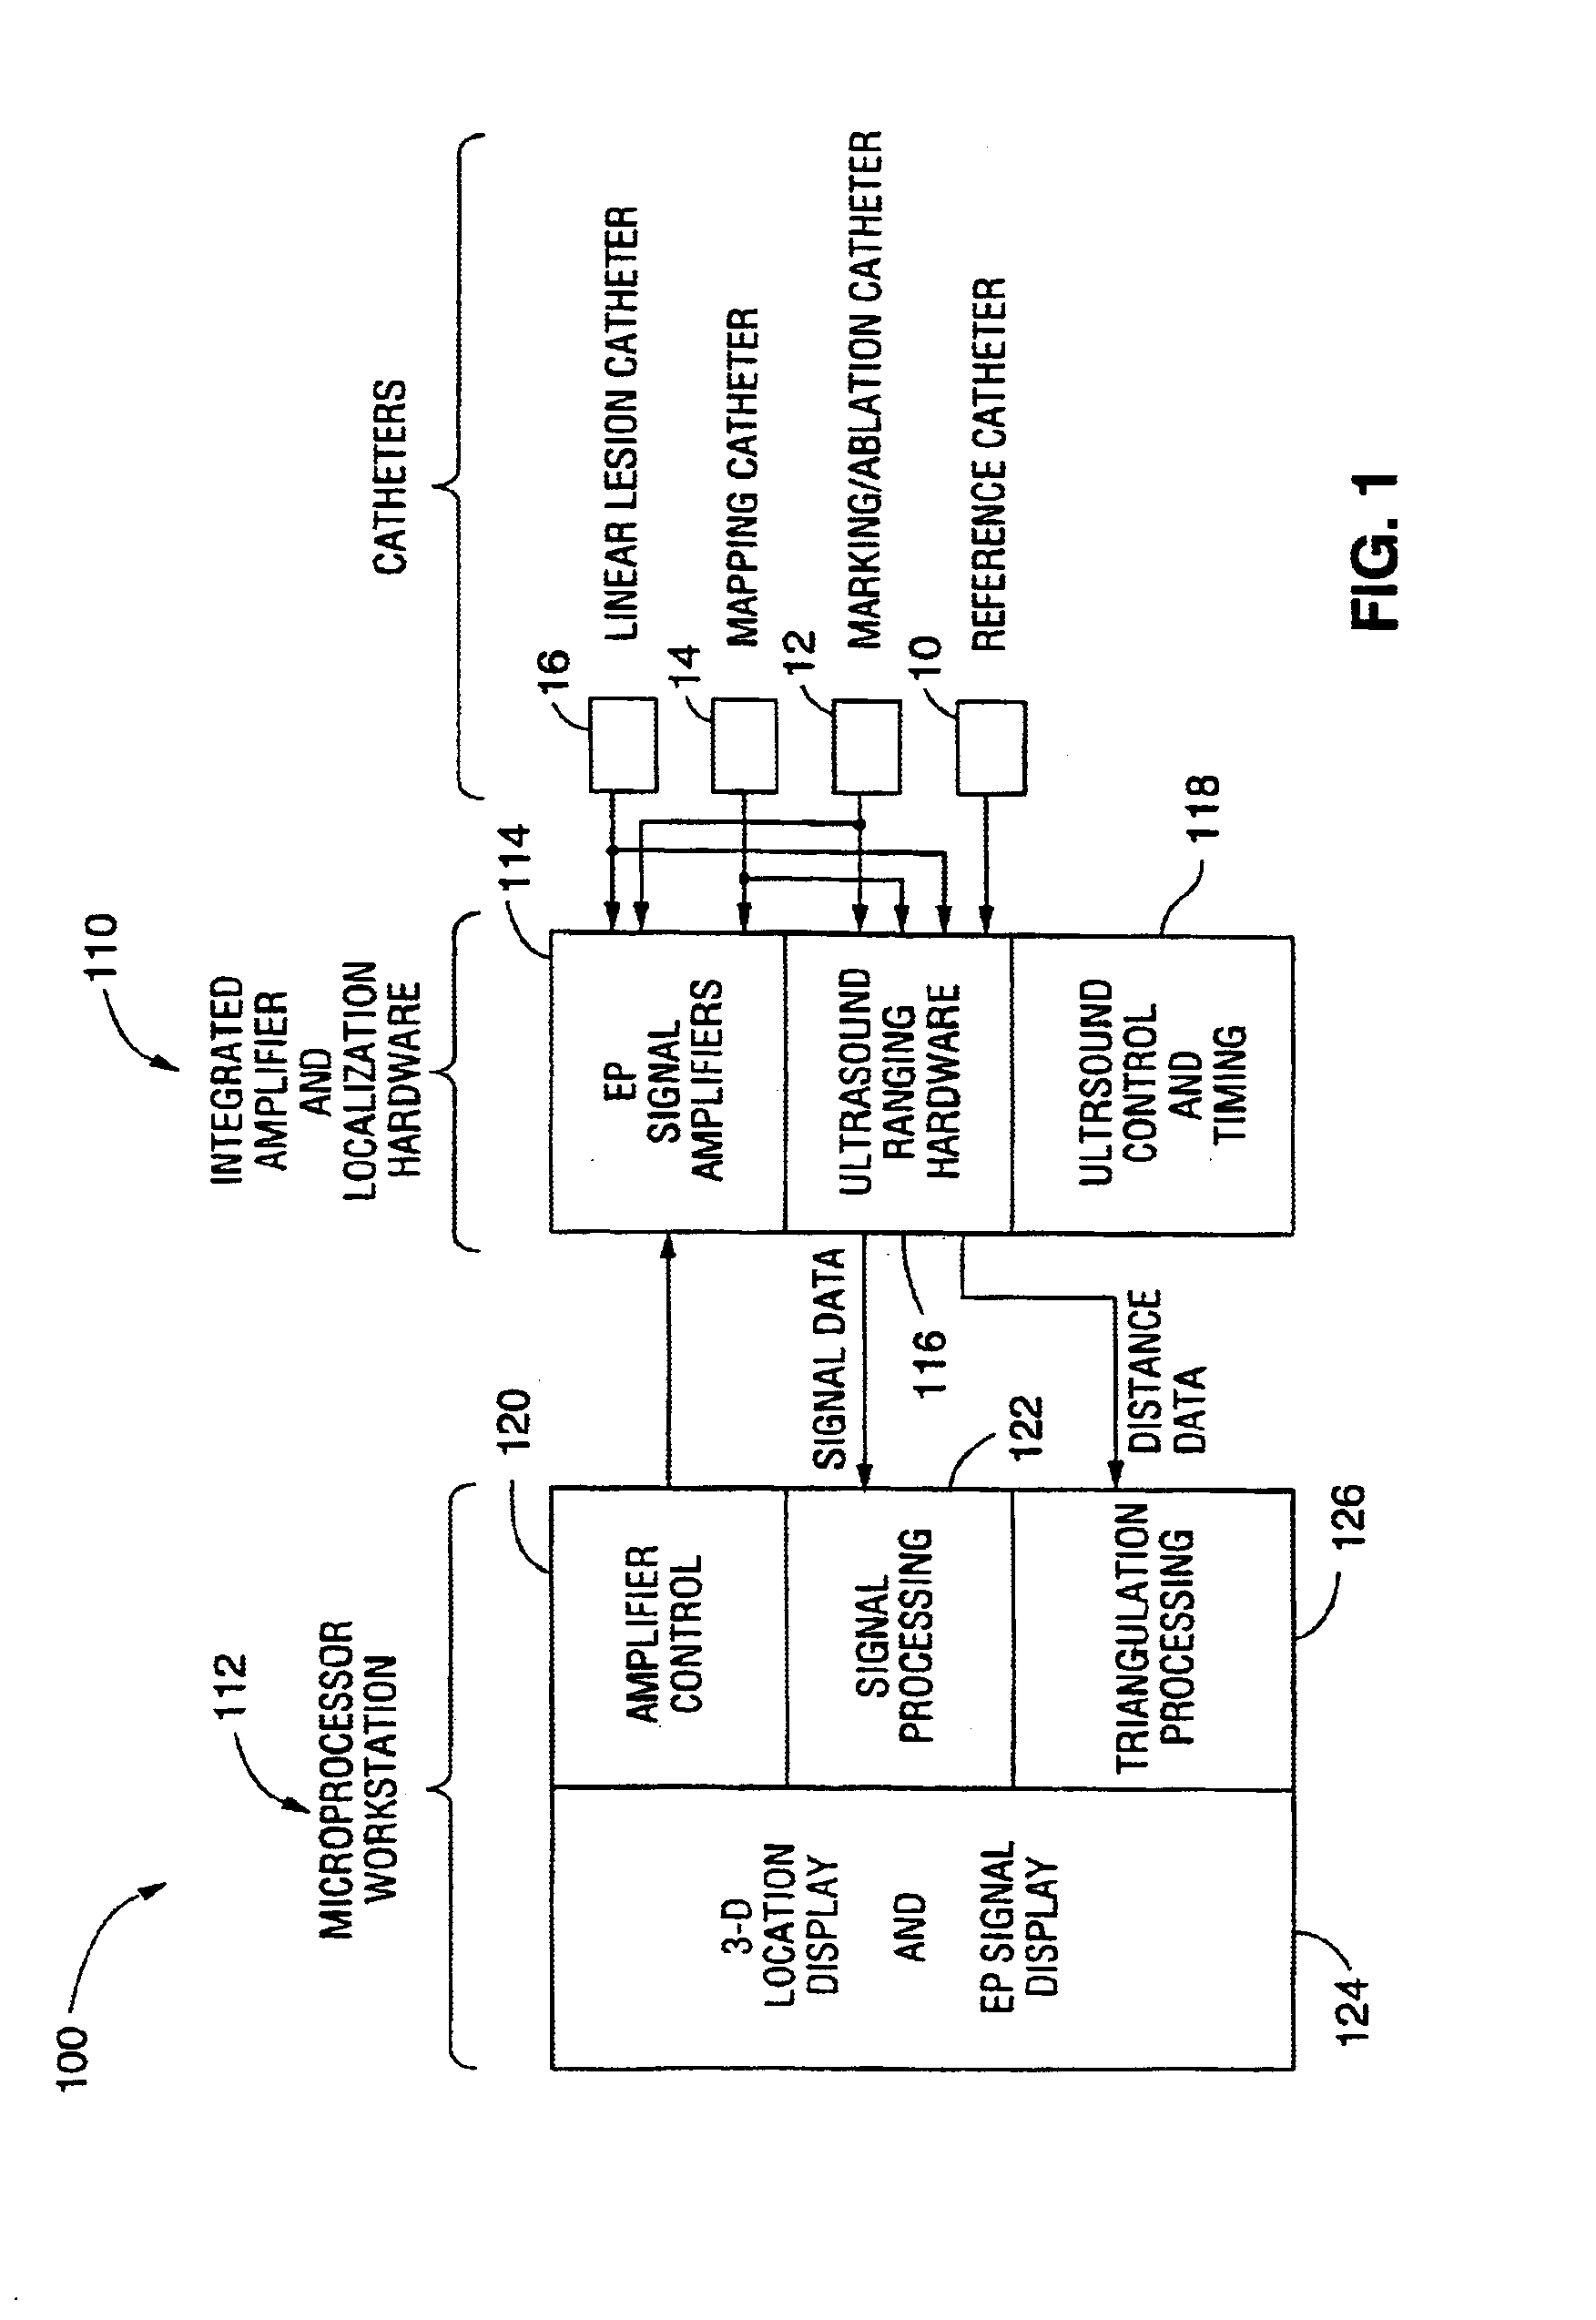 Dynamically alterable three-dimensional graphical model of a body region